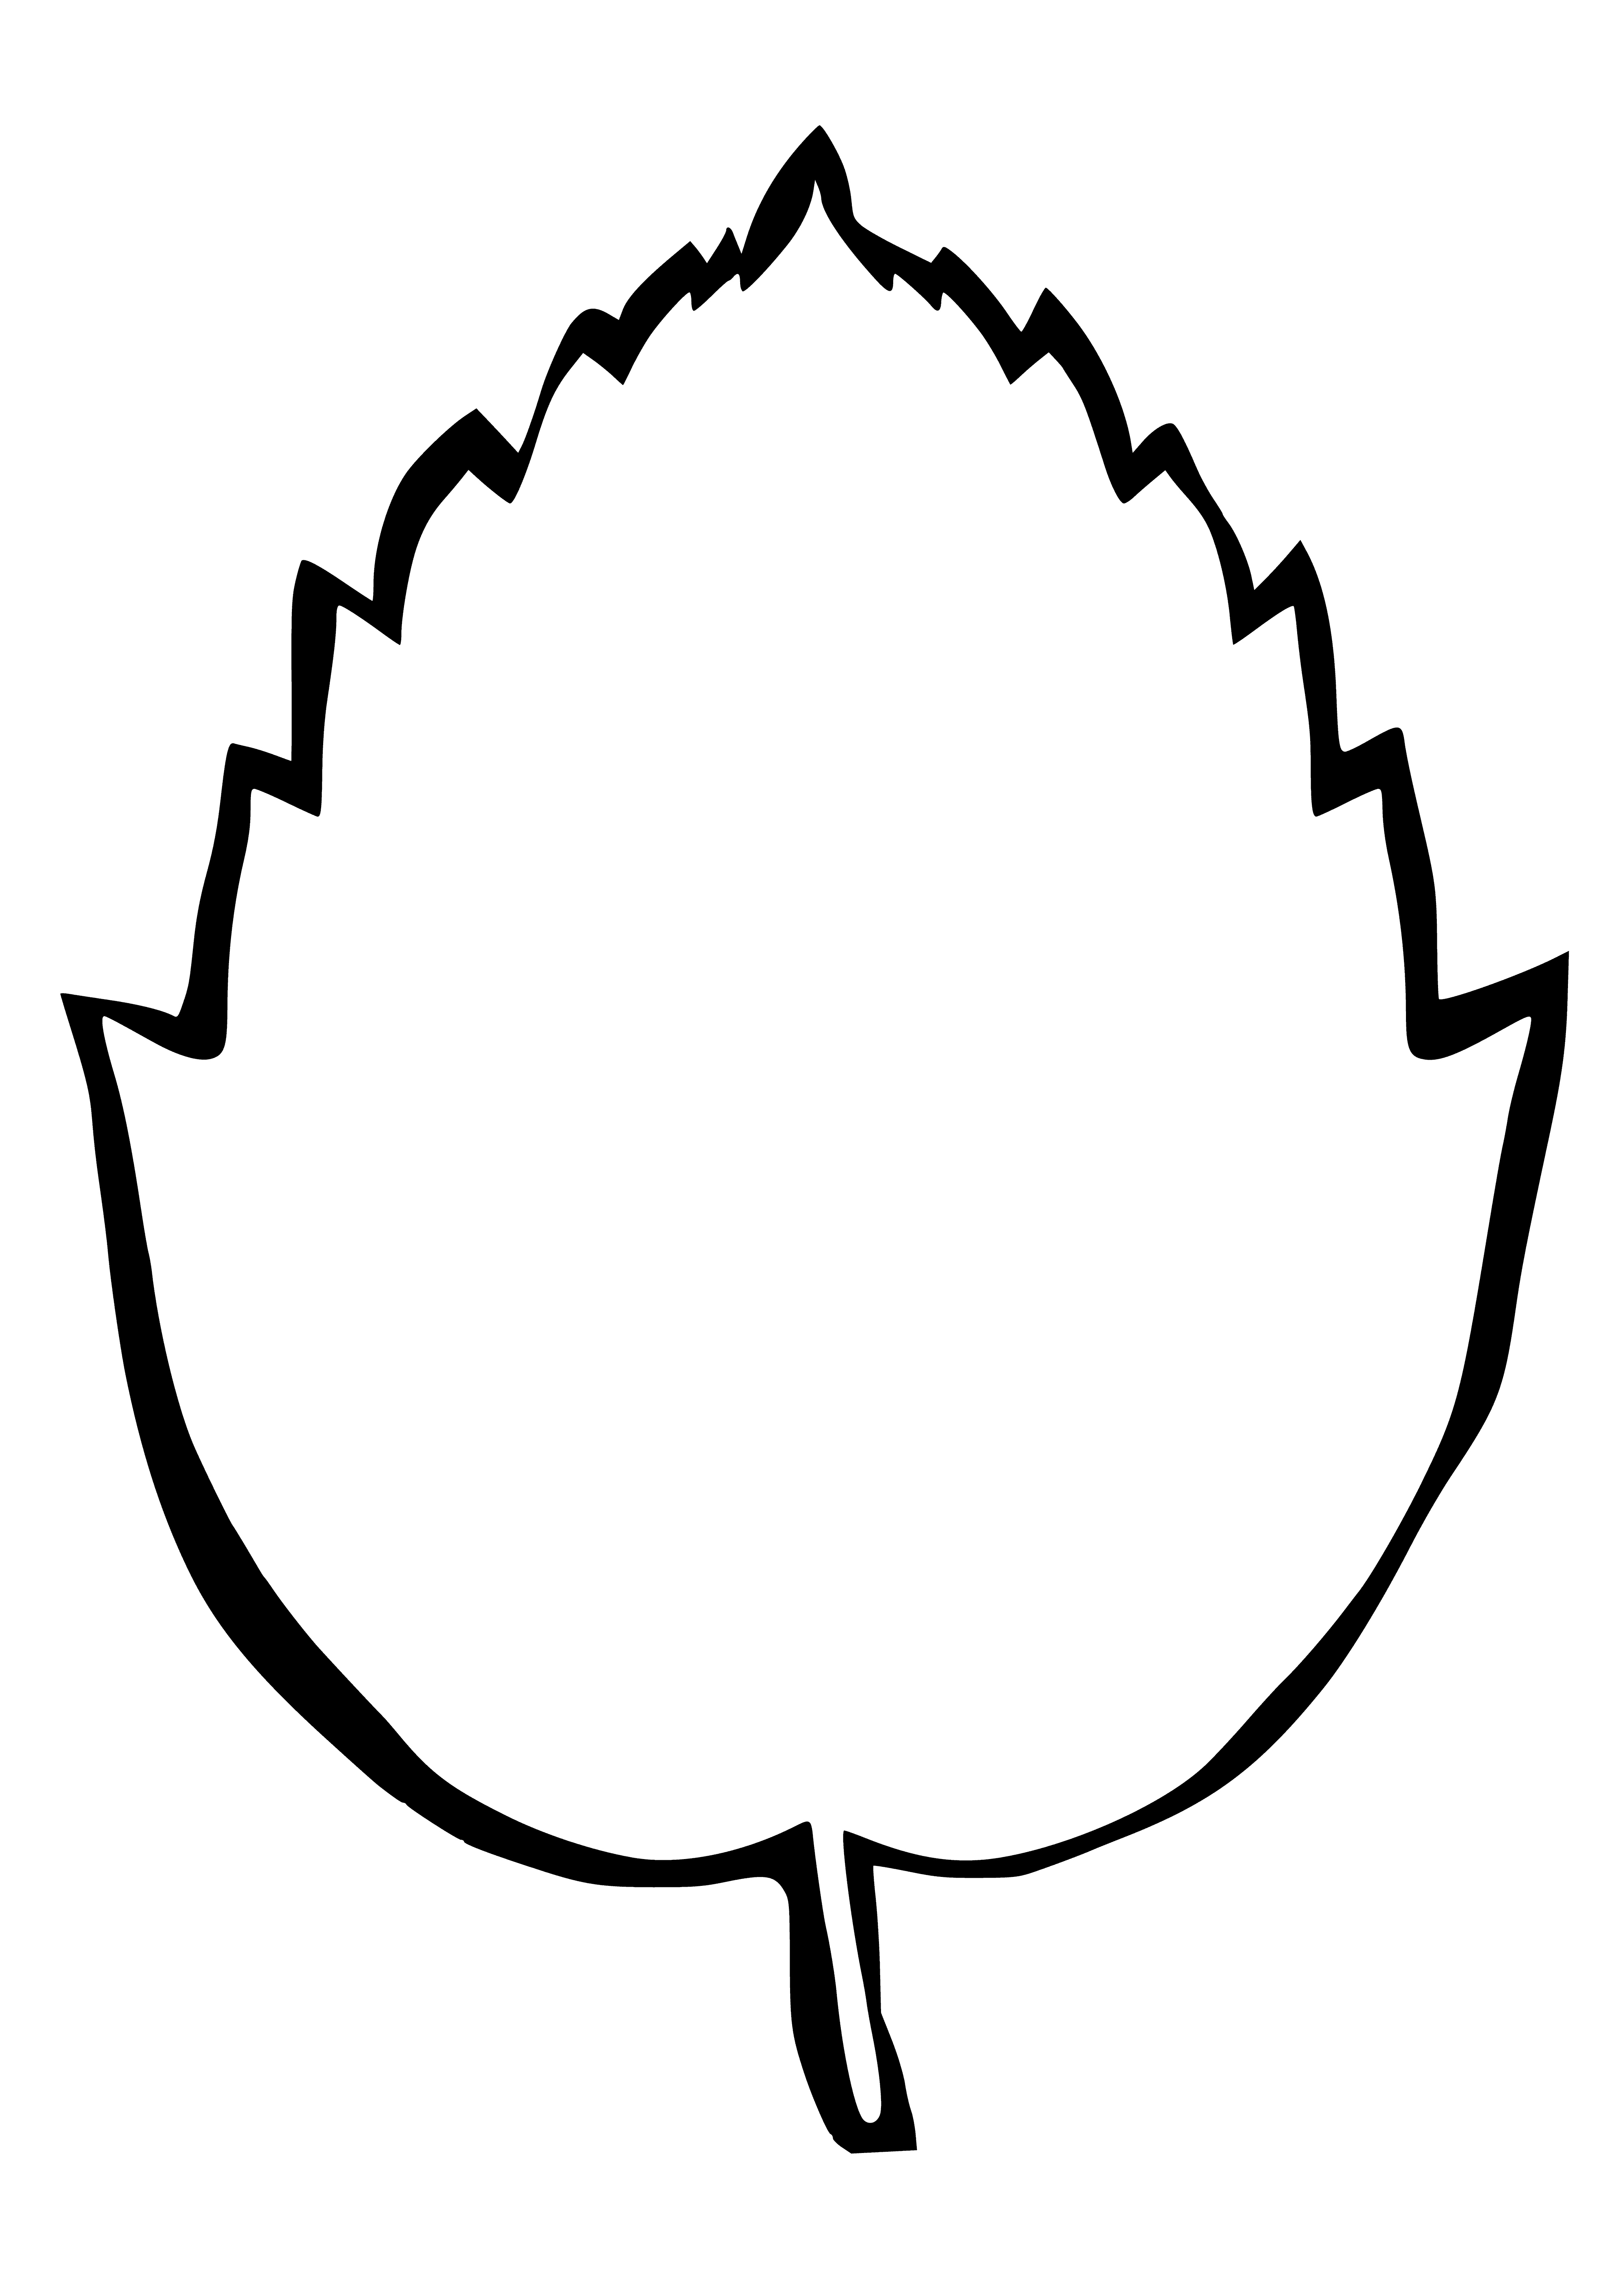 coloring page: Small, oblong, bumpy dark green leaf with curved edges and a light brown stem. No flowers or fruits. #nature